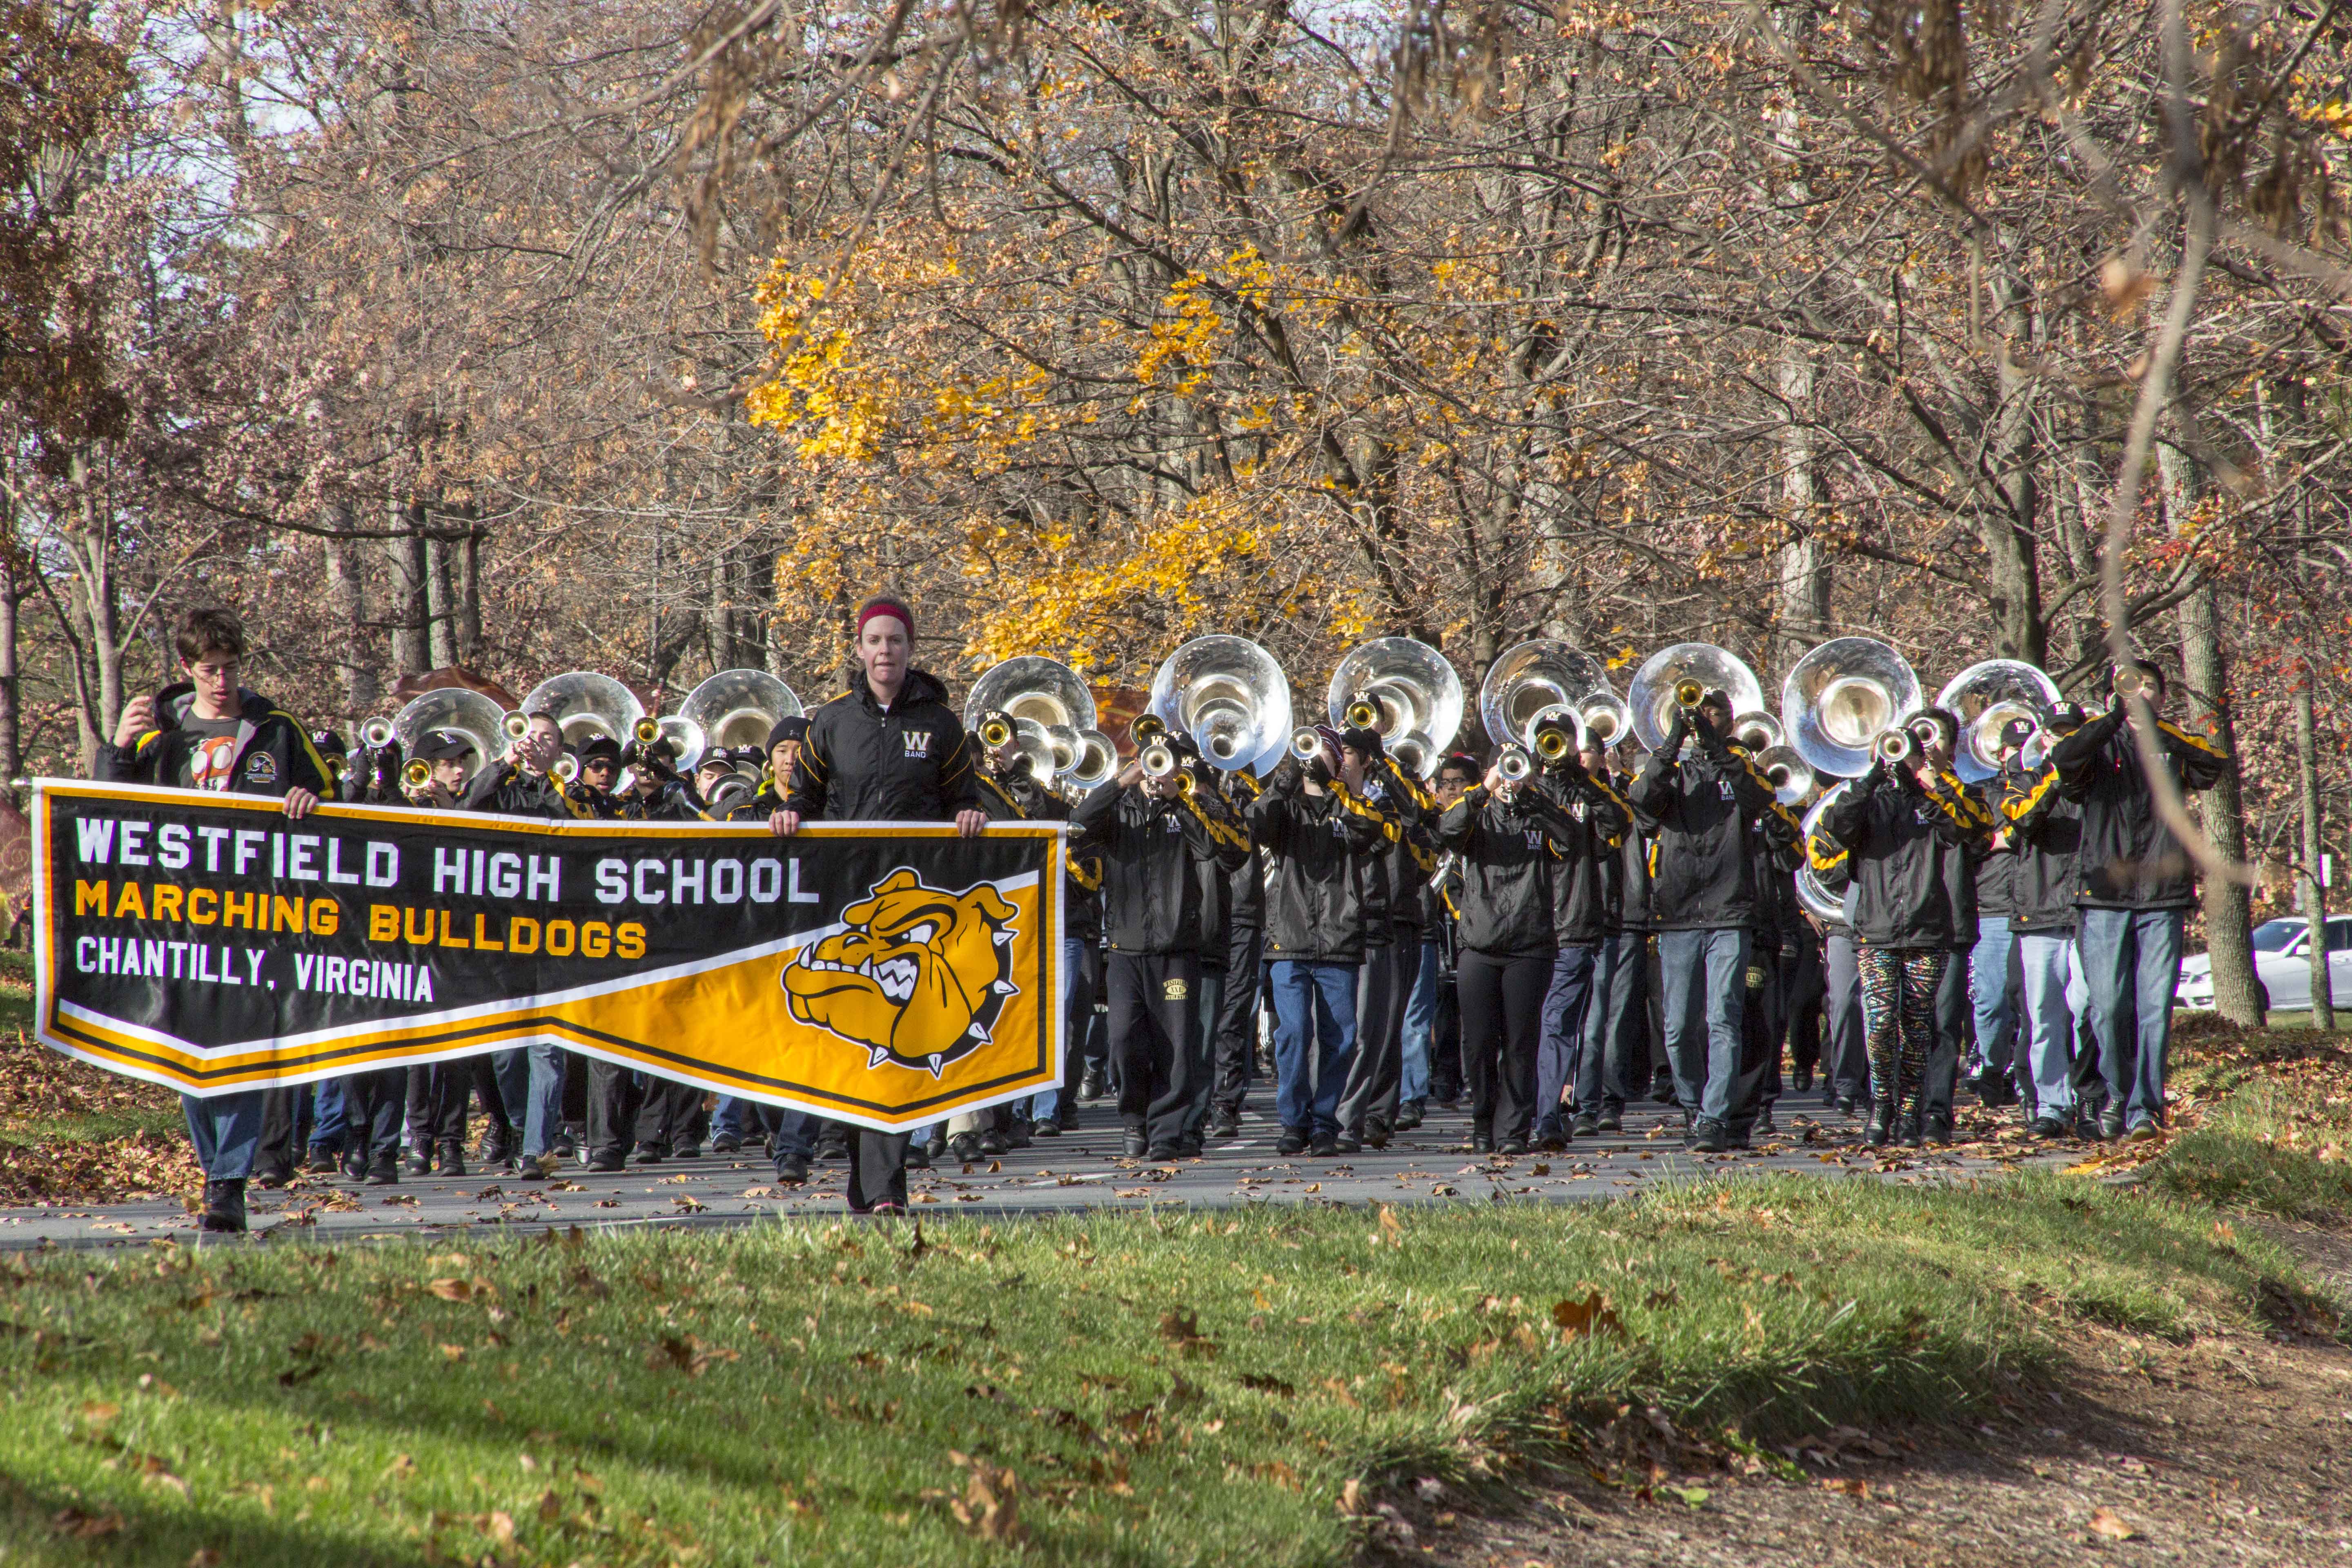 Band Practices Street March Amid Fall Colors